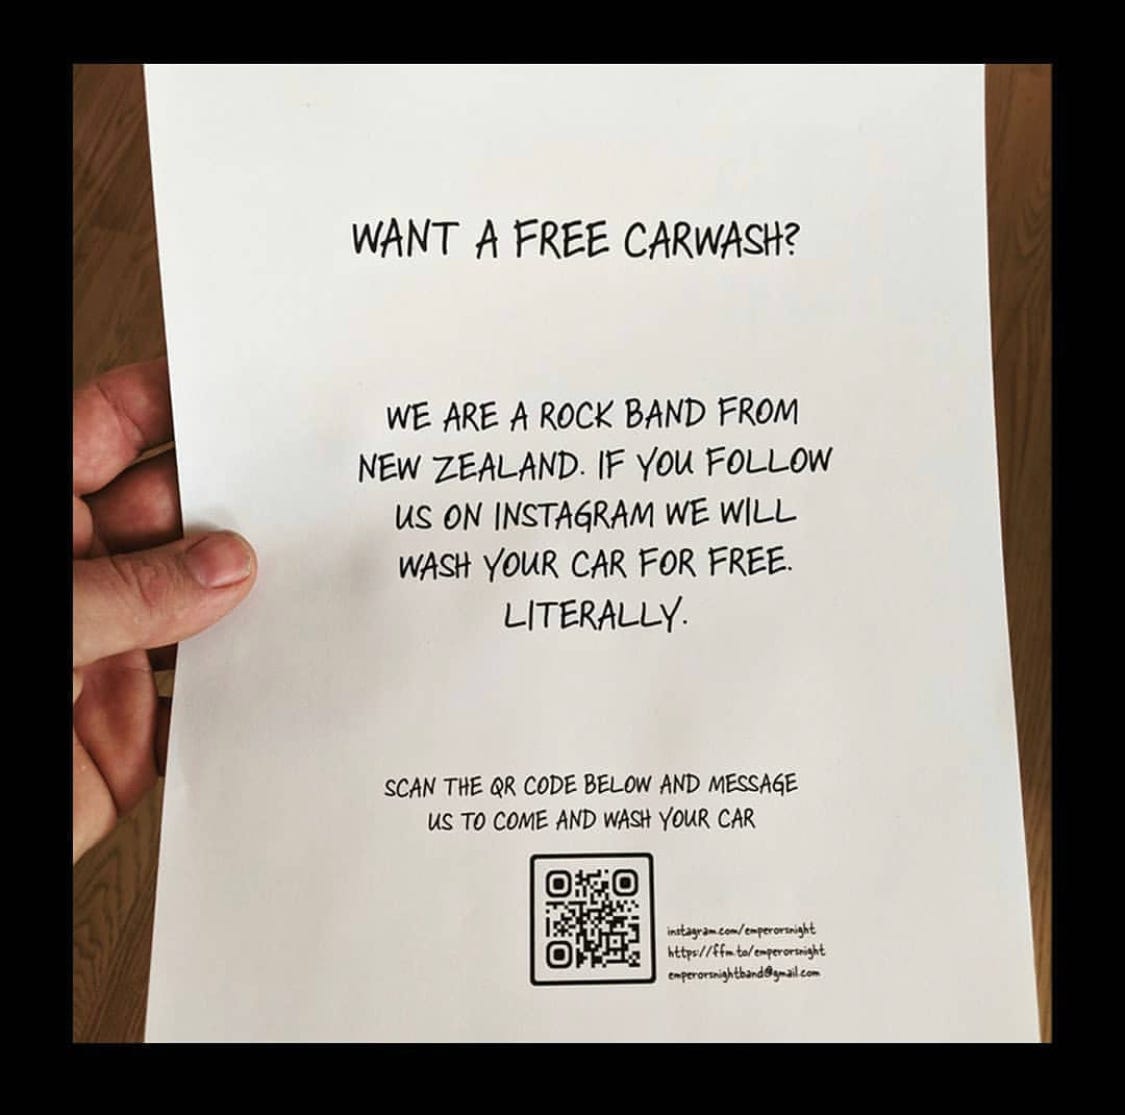 Picture of hand holding a paper flyer which reads "We are a rock band from New Zealand. If you follow us on instagram we will wash your car for free literally." At the bottom of the flyer is a QR code and links to the band's social media accounts.